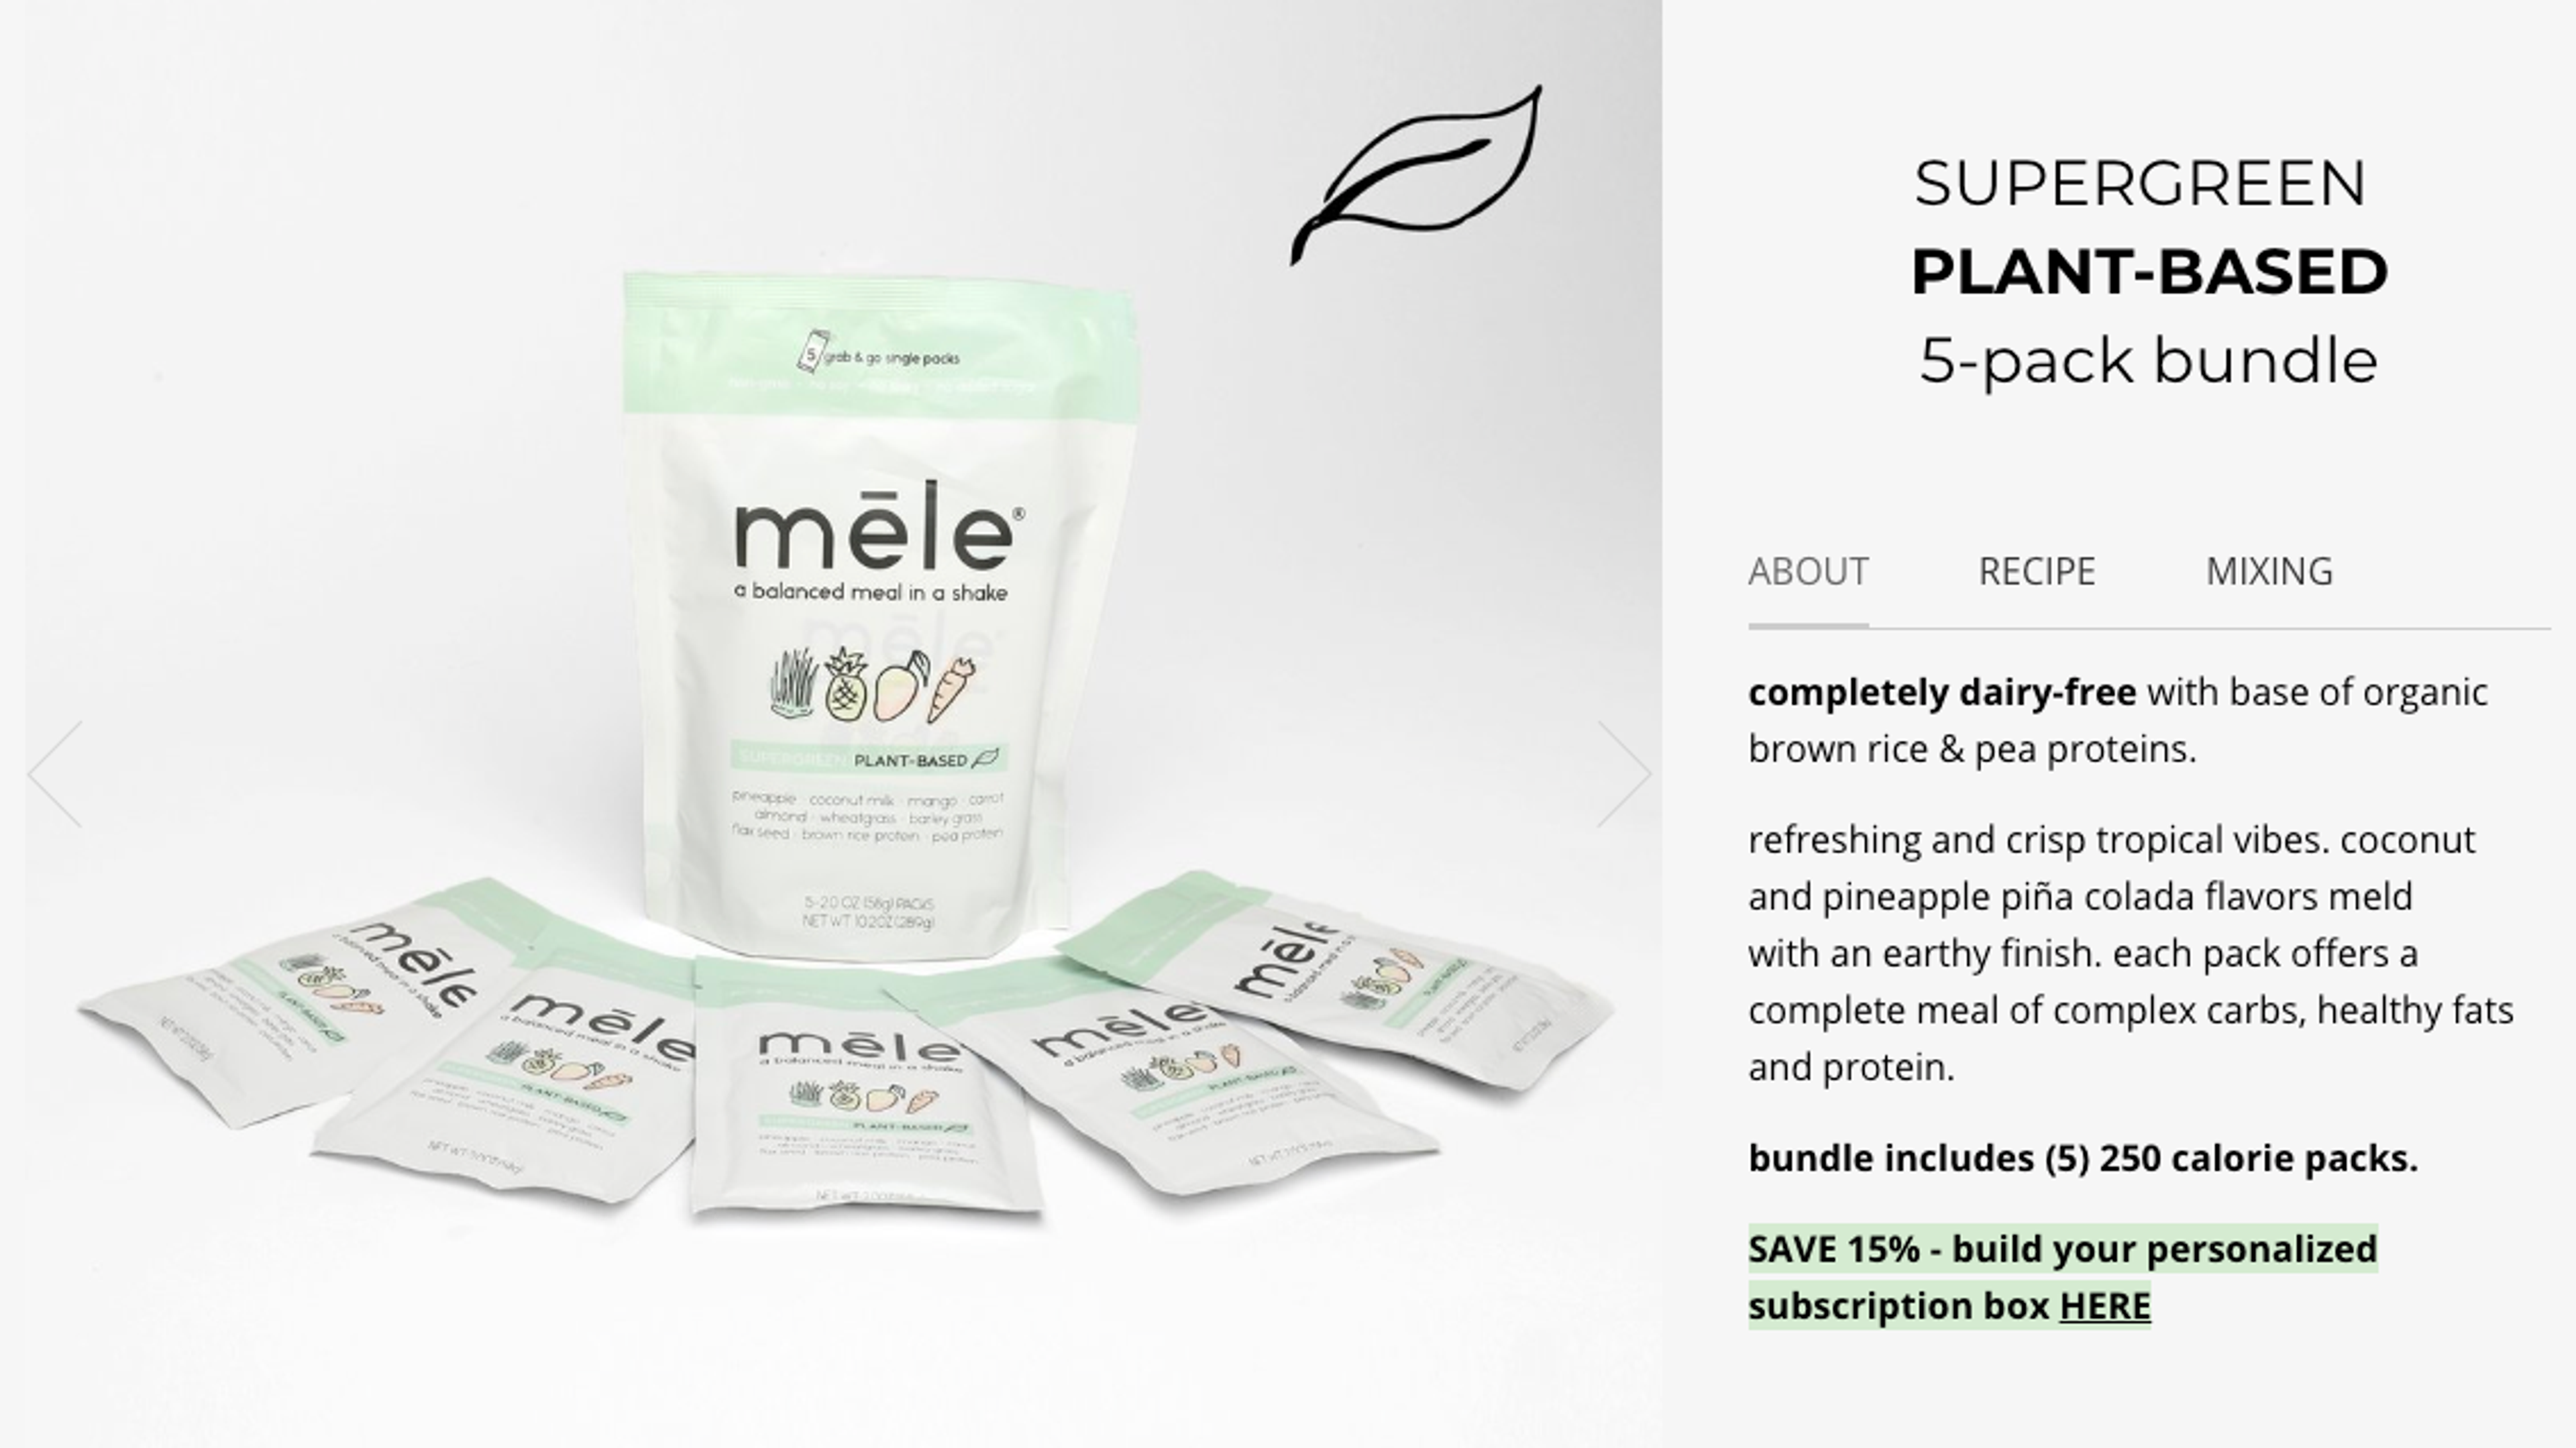 Mele upselling a subscription